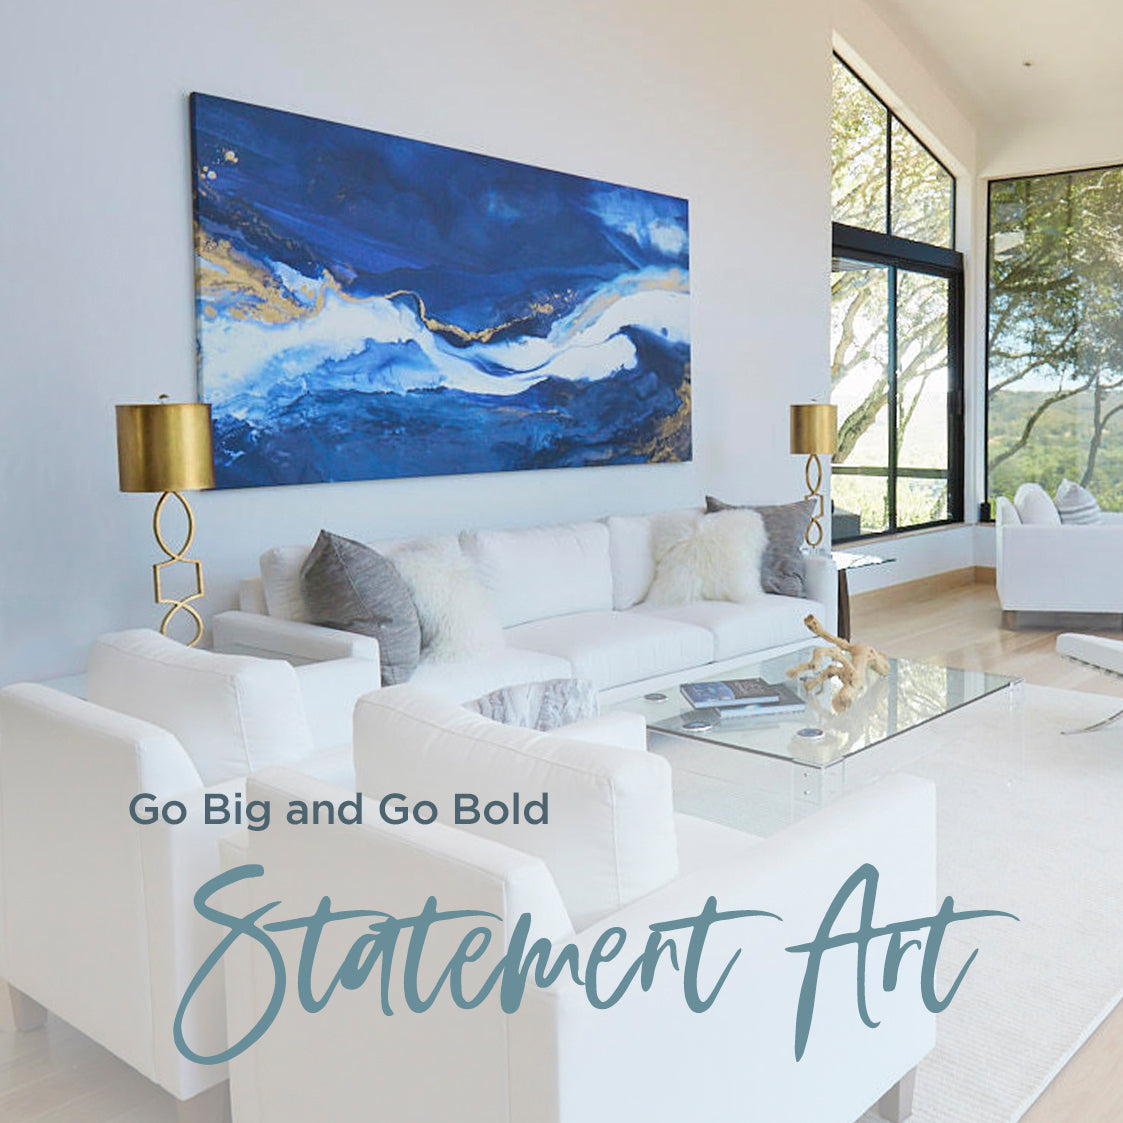 Go Big and Go Bold:  Using Statement Art in Your Home